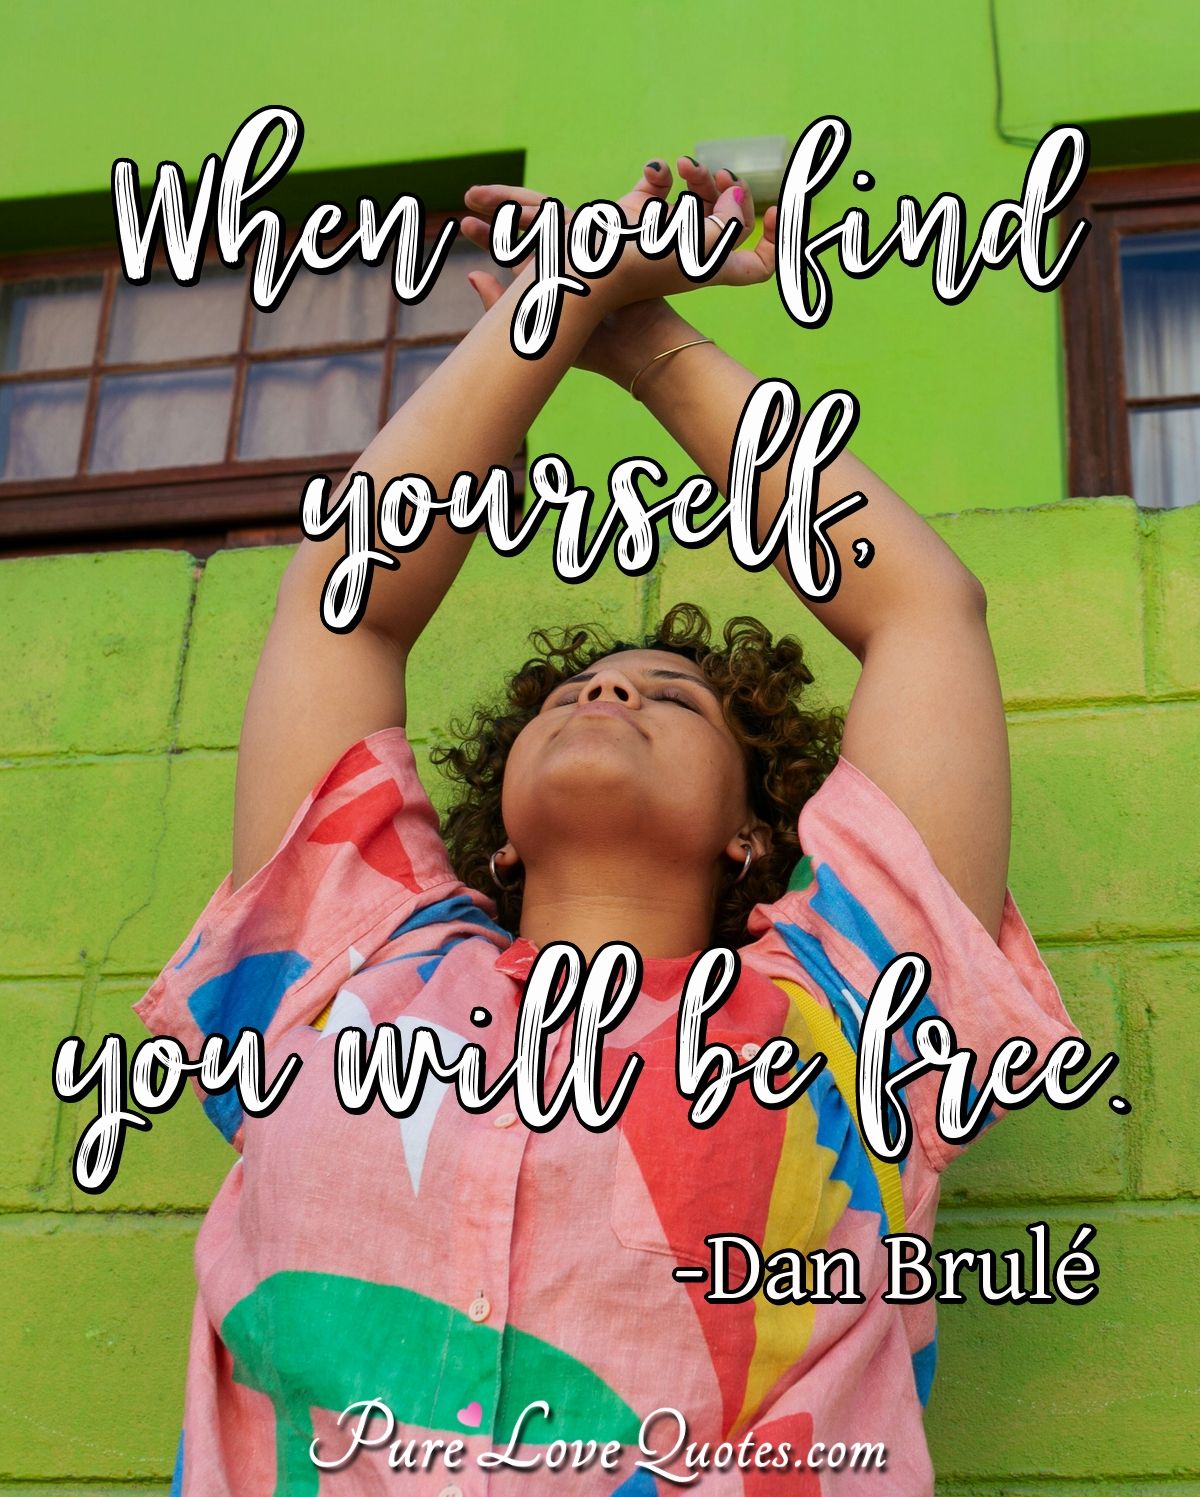 When you find yourself, you will be free. - Dan Brulé